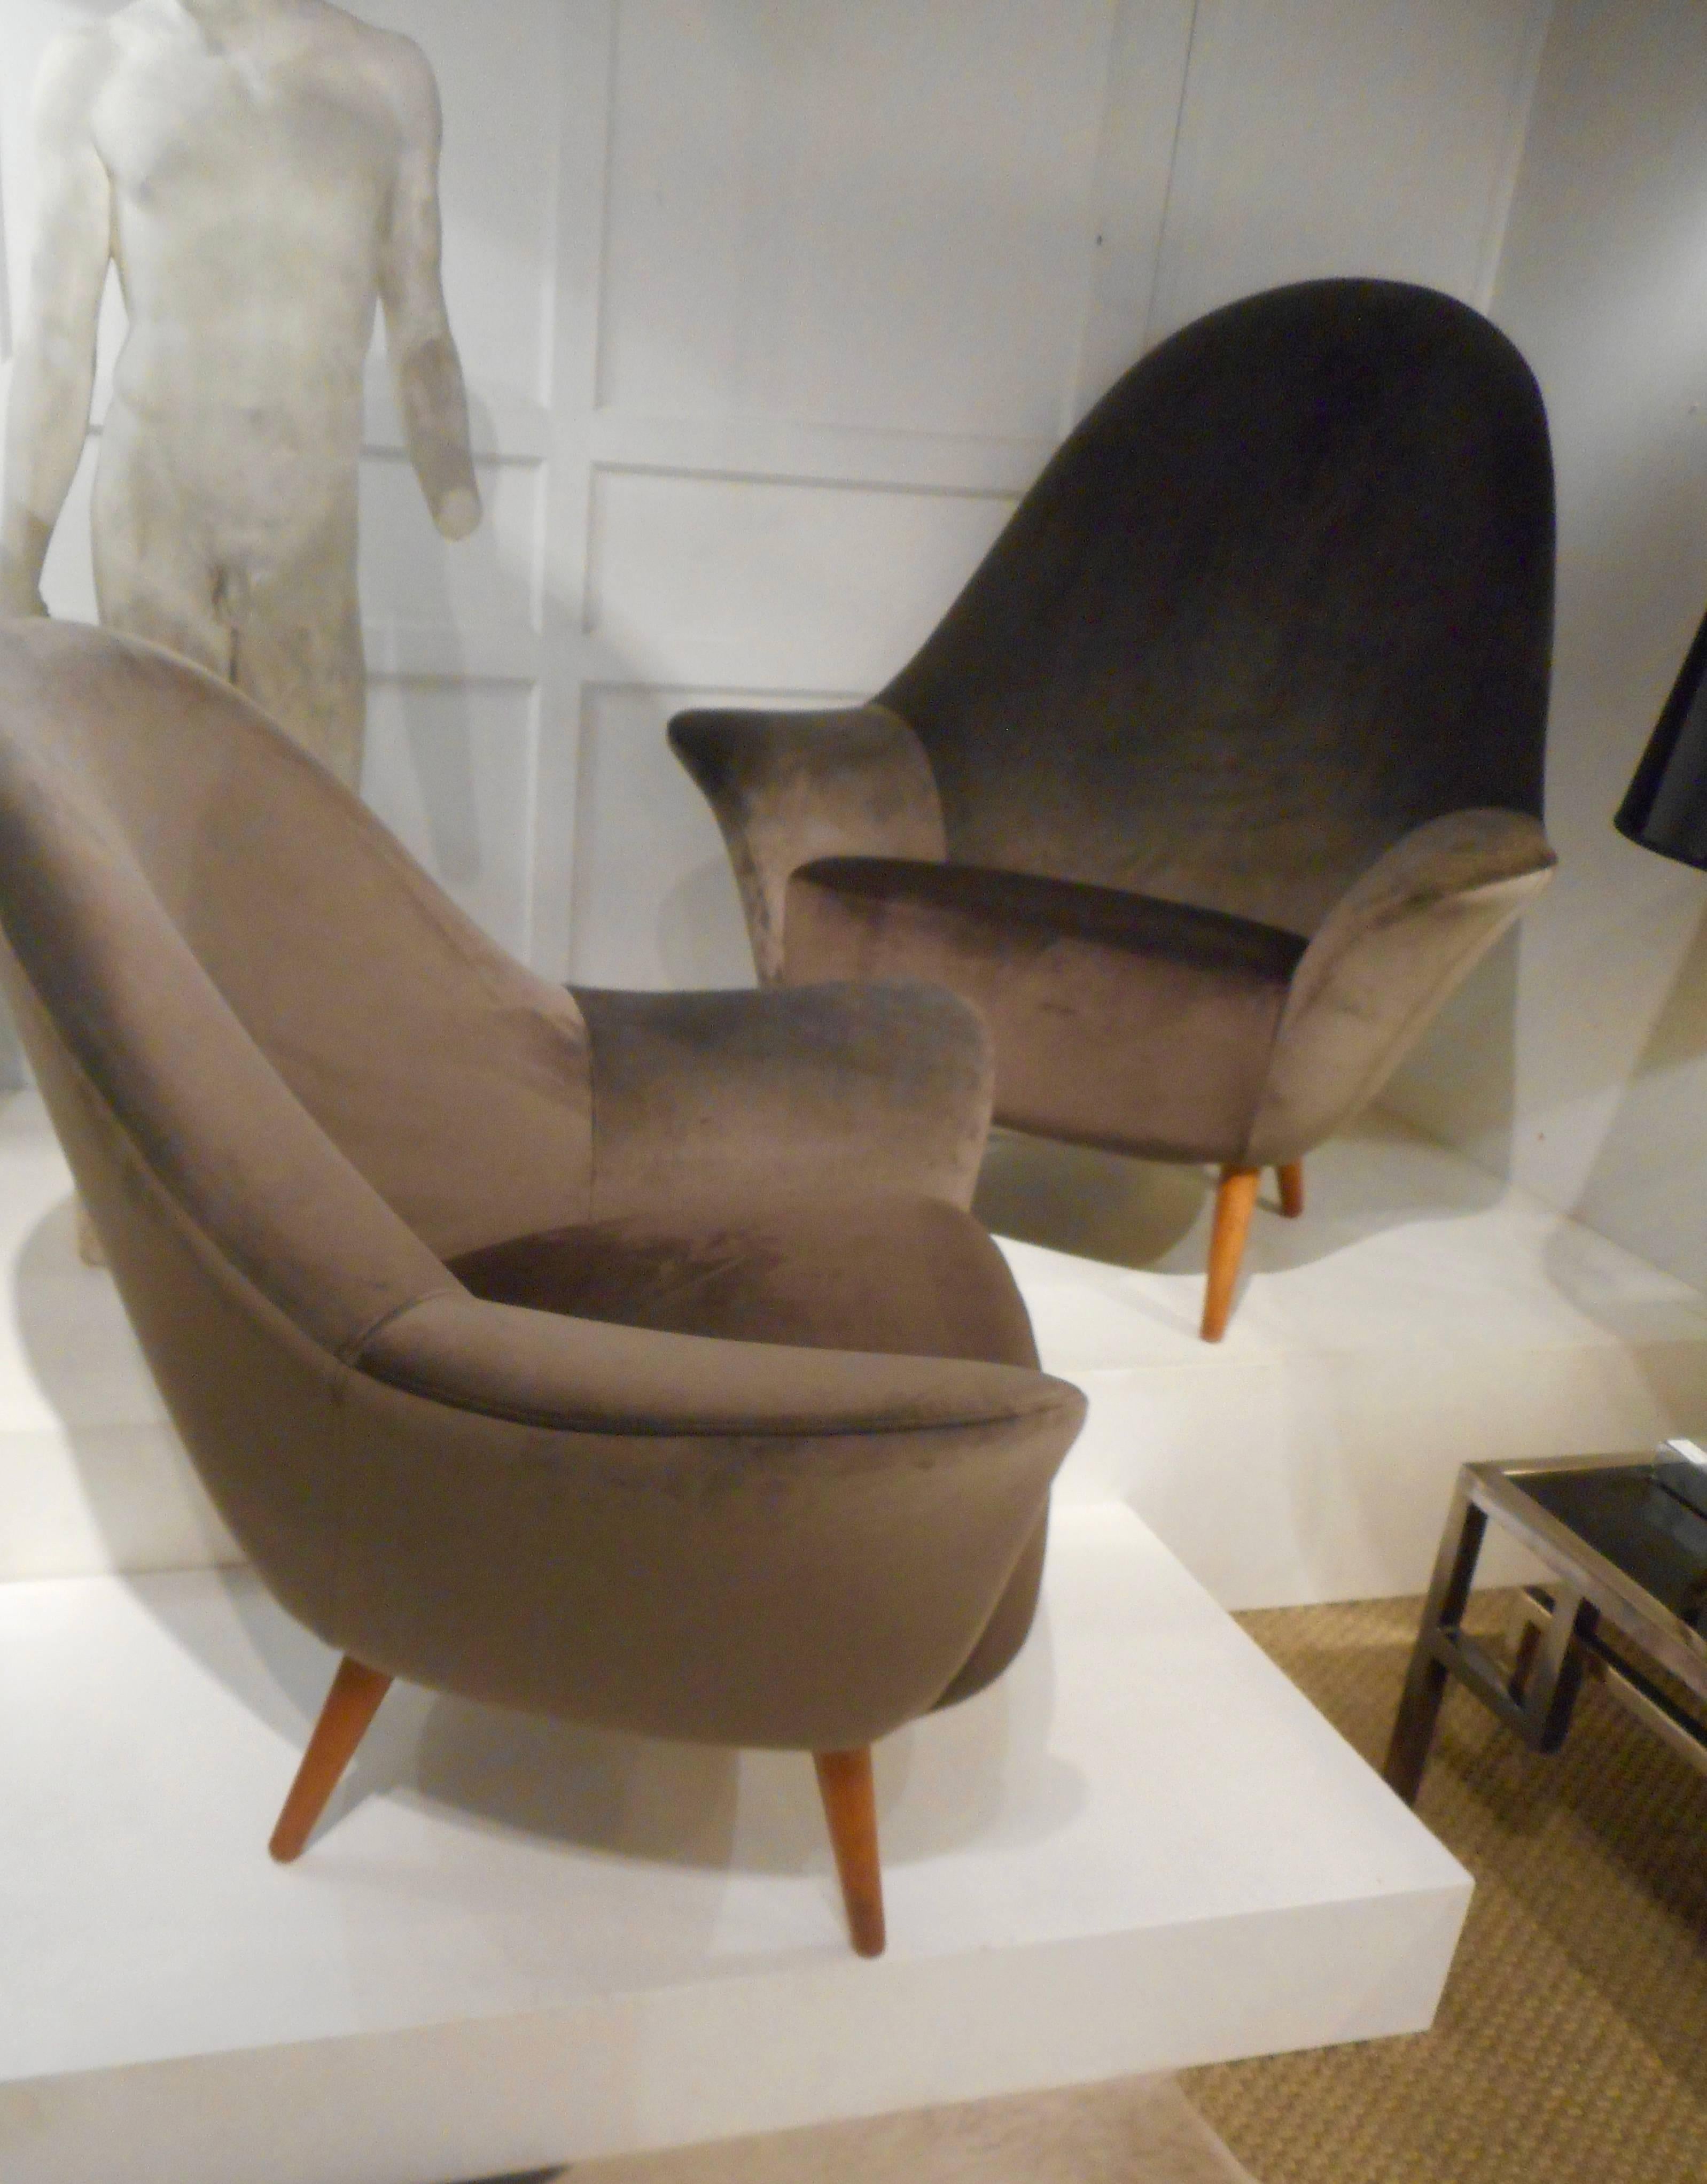 Newly covered with velvet ( 2tones: mink color and truffle for the seat)
Denmark, circa 1950.
Birch feet.